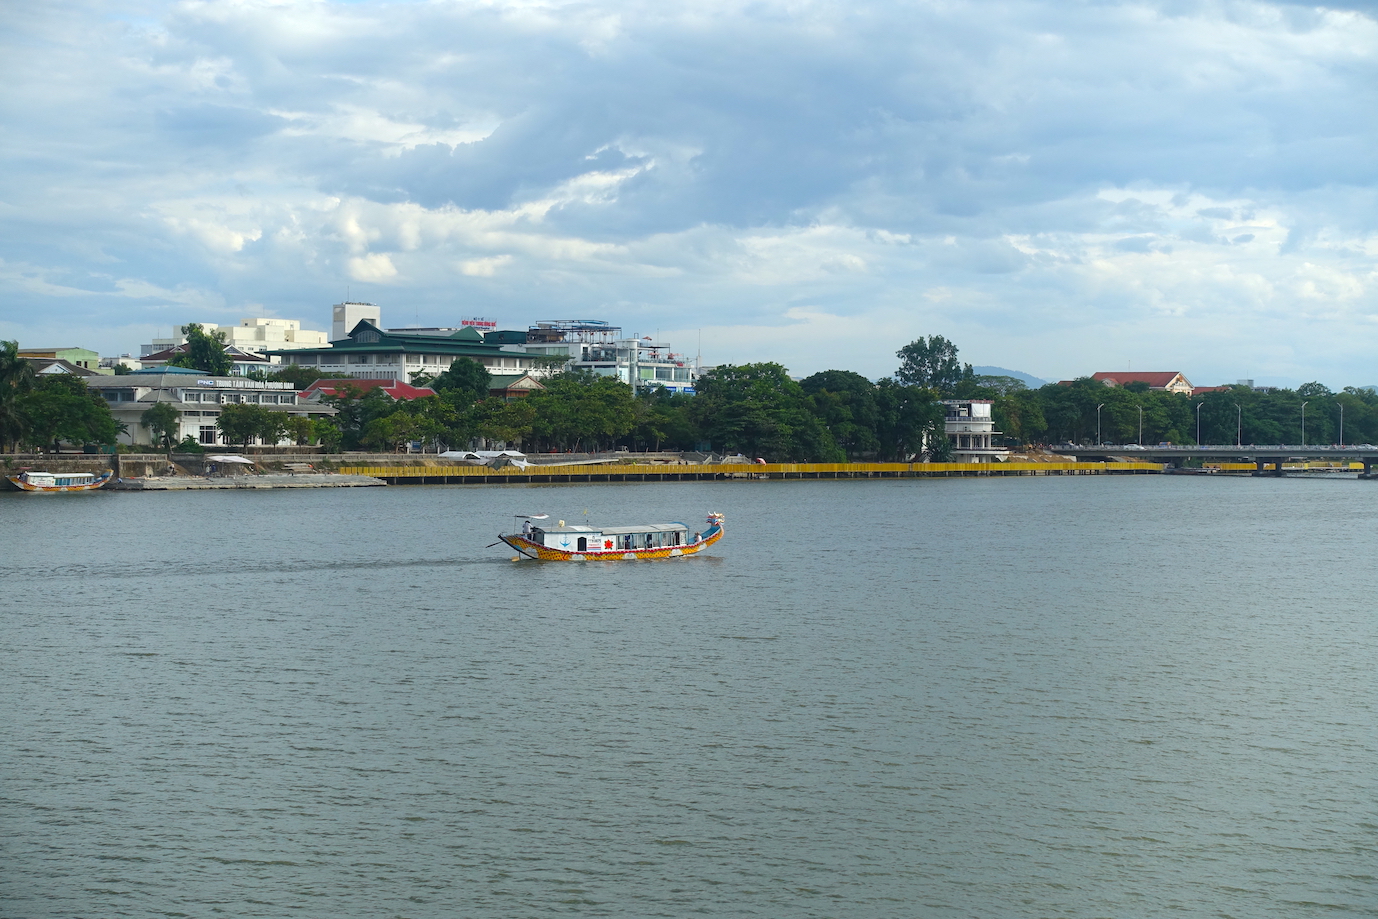 A view of the perfume river, some buildings and a boat crossing the river